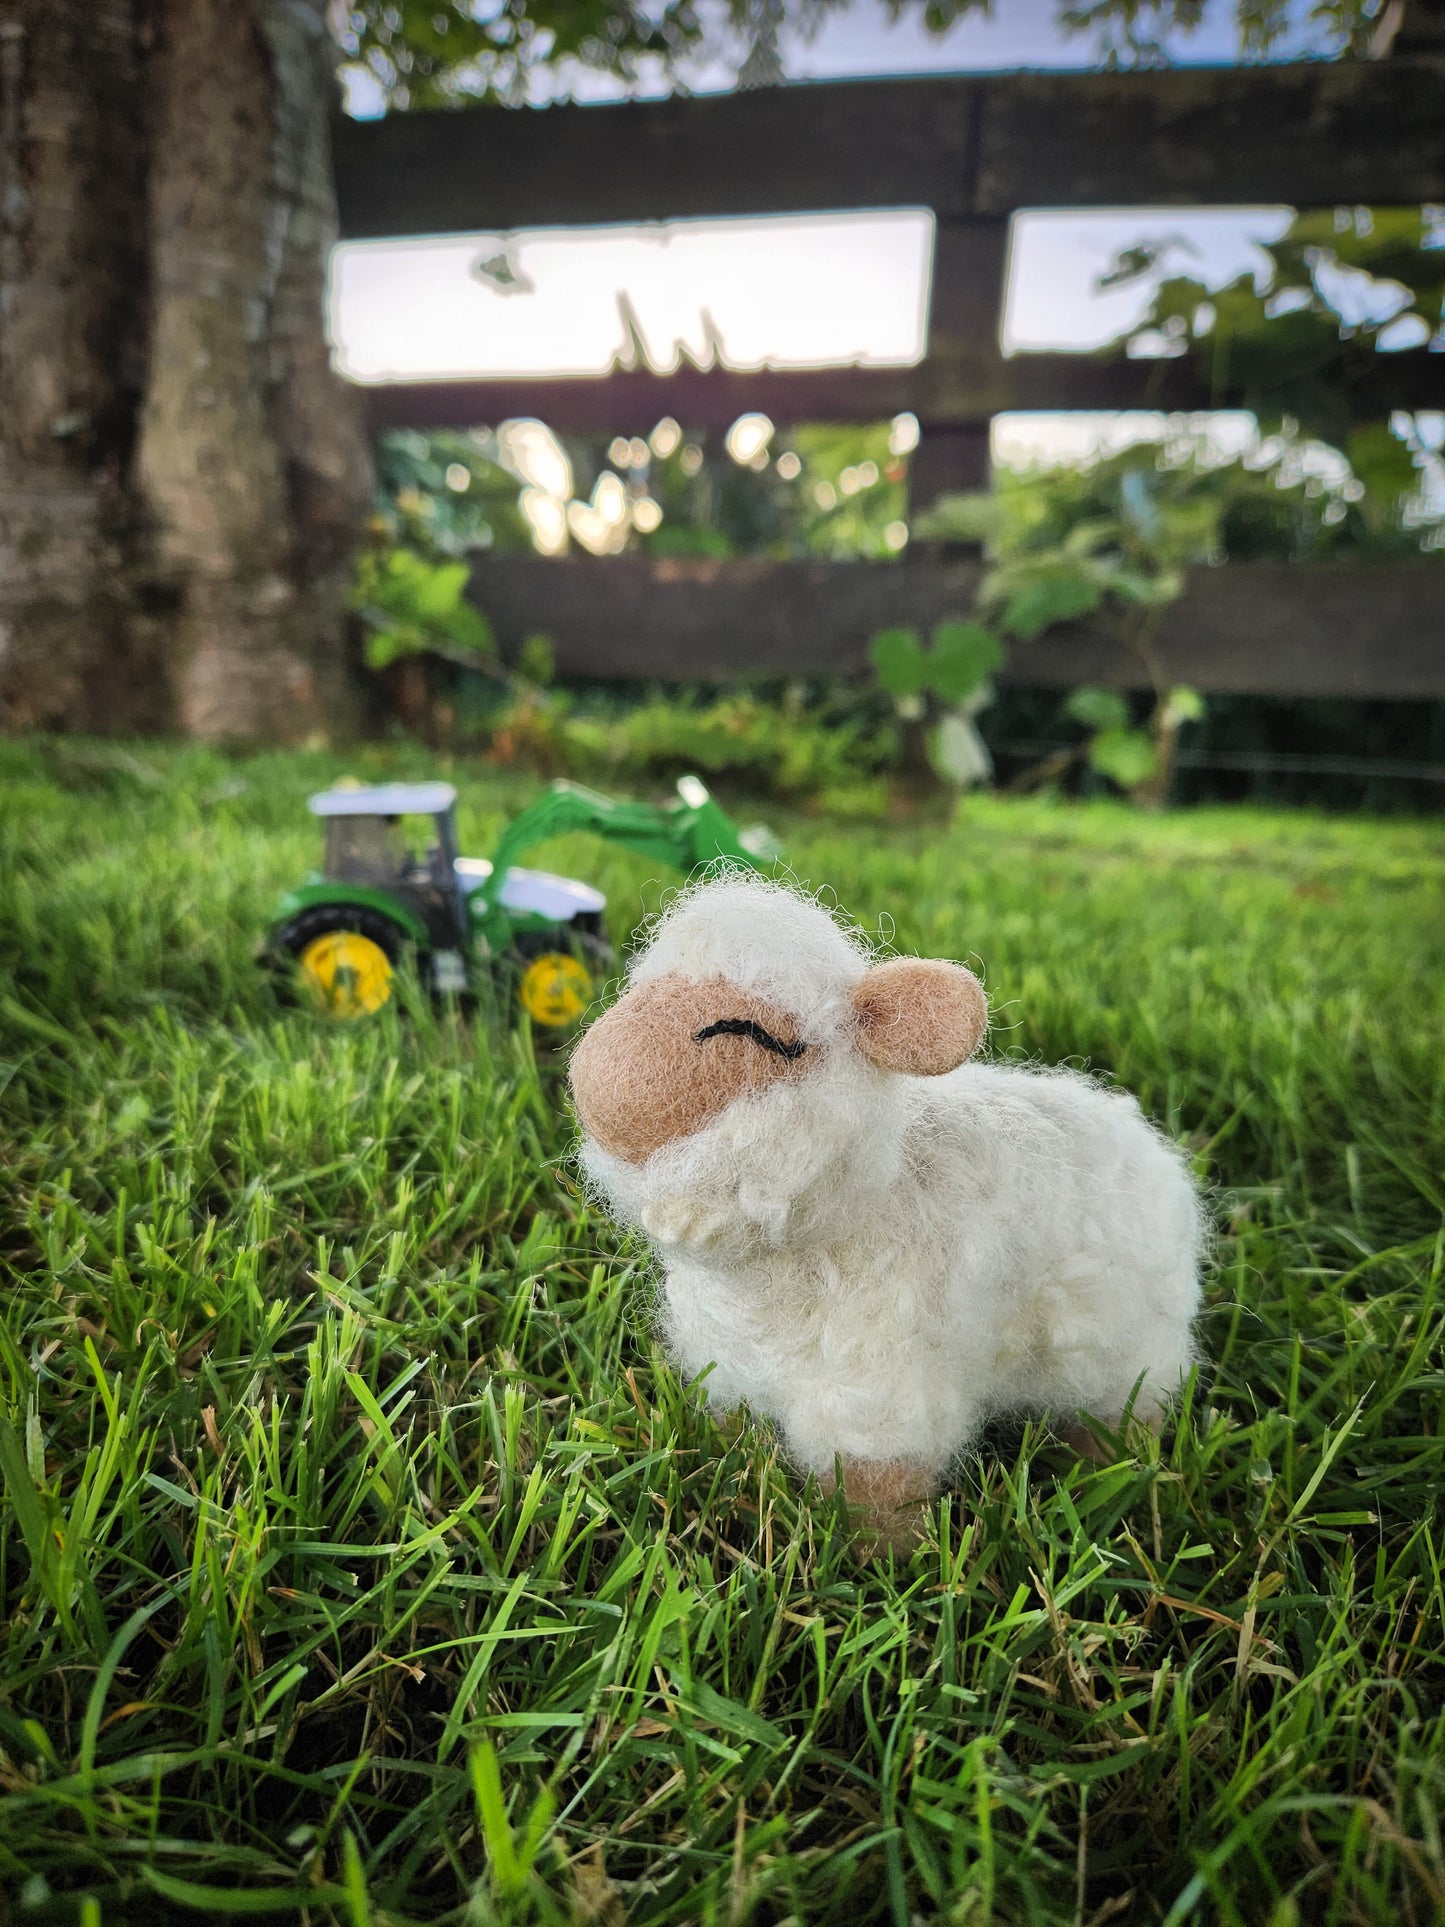 Sally the Sheep - Felt Toy Sheep in grass paddock with toy tractor